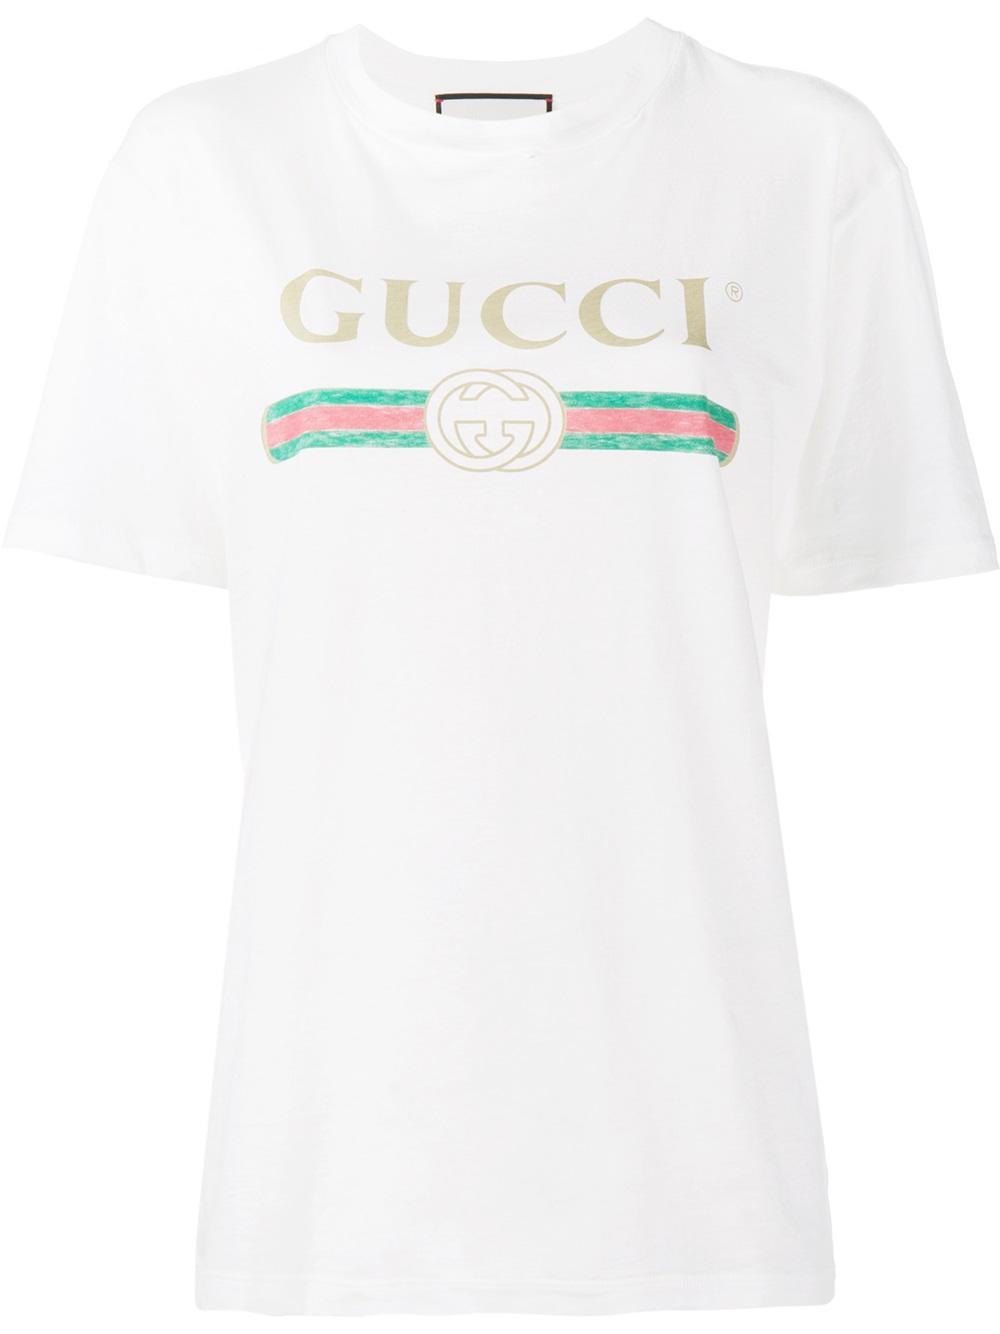 Gucci Print T-shirt in White | Lyst